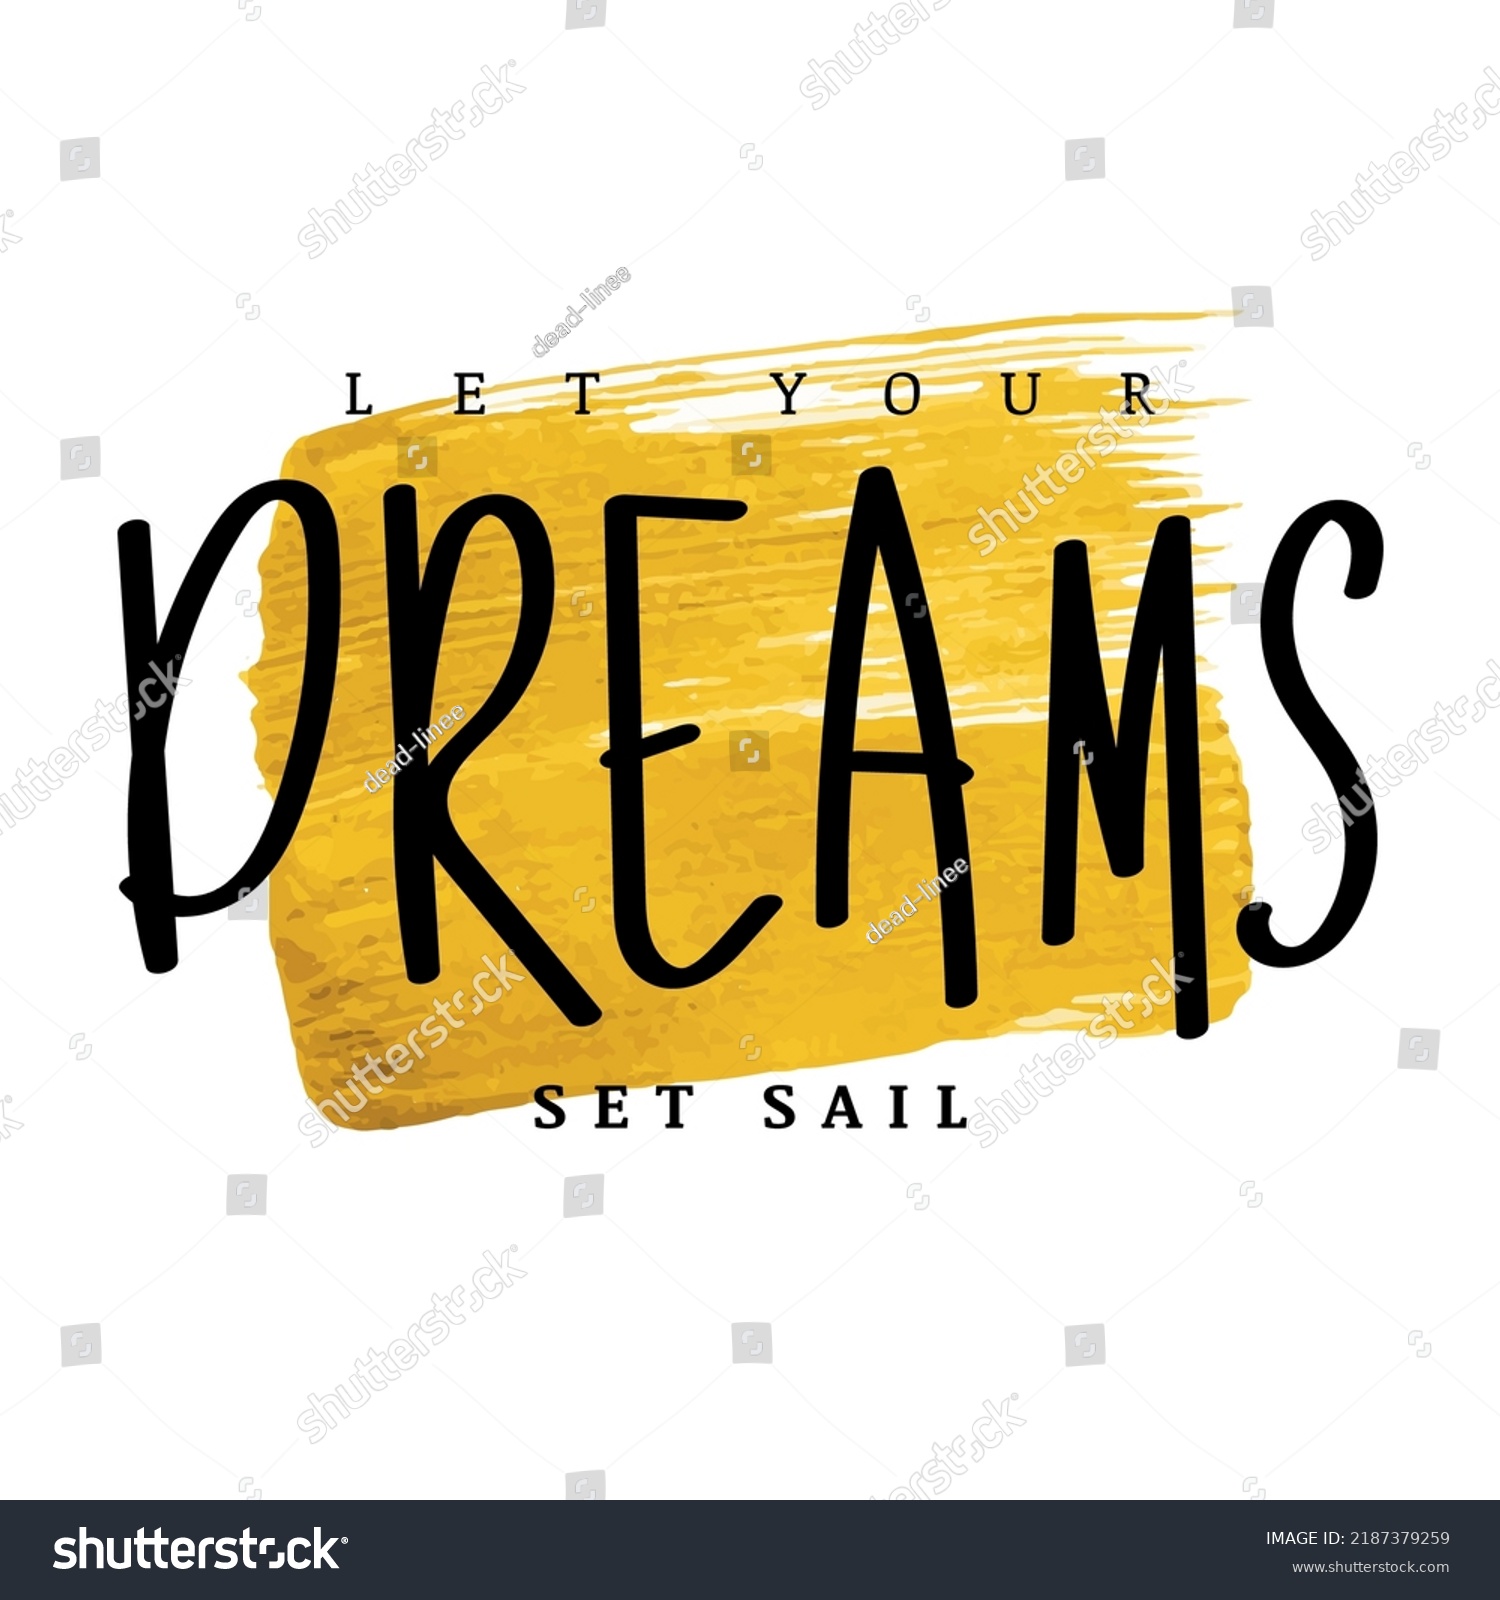 let-your-dreams-set-sail-text-stock-vector-royalty-free-2187379259